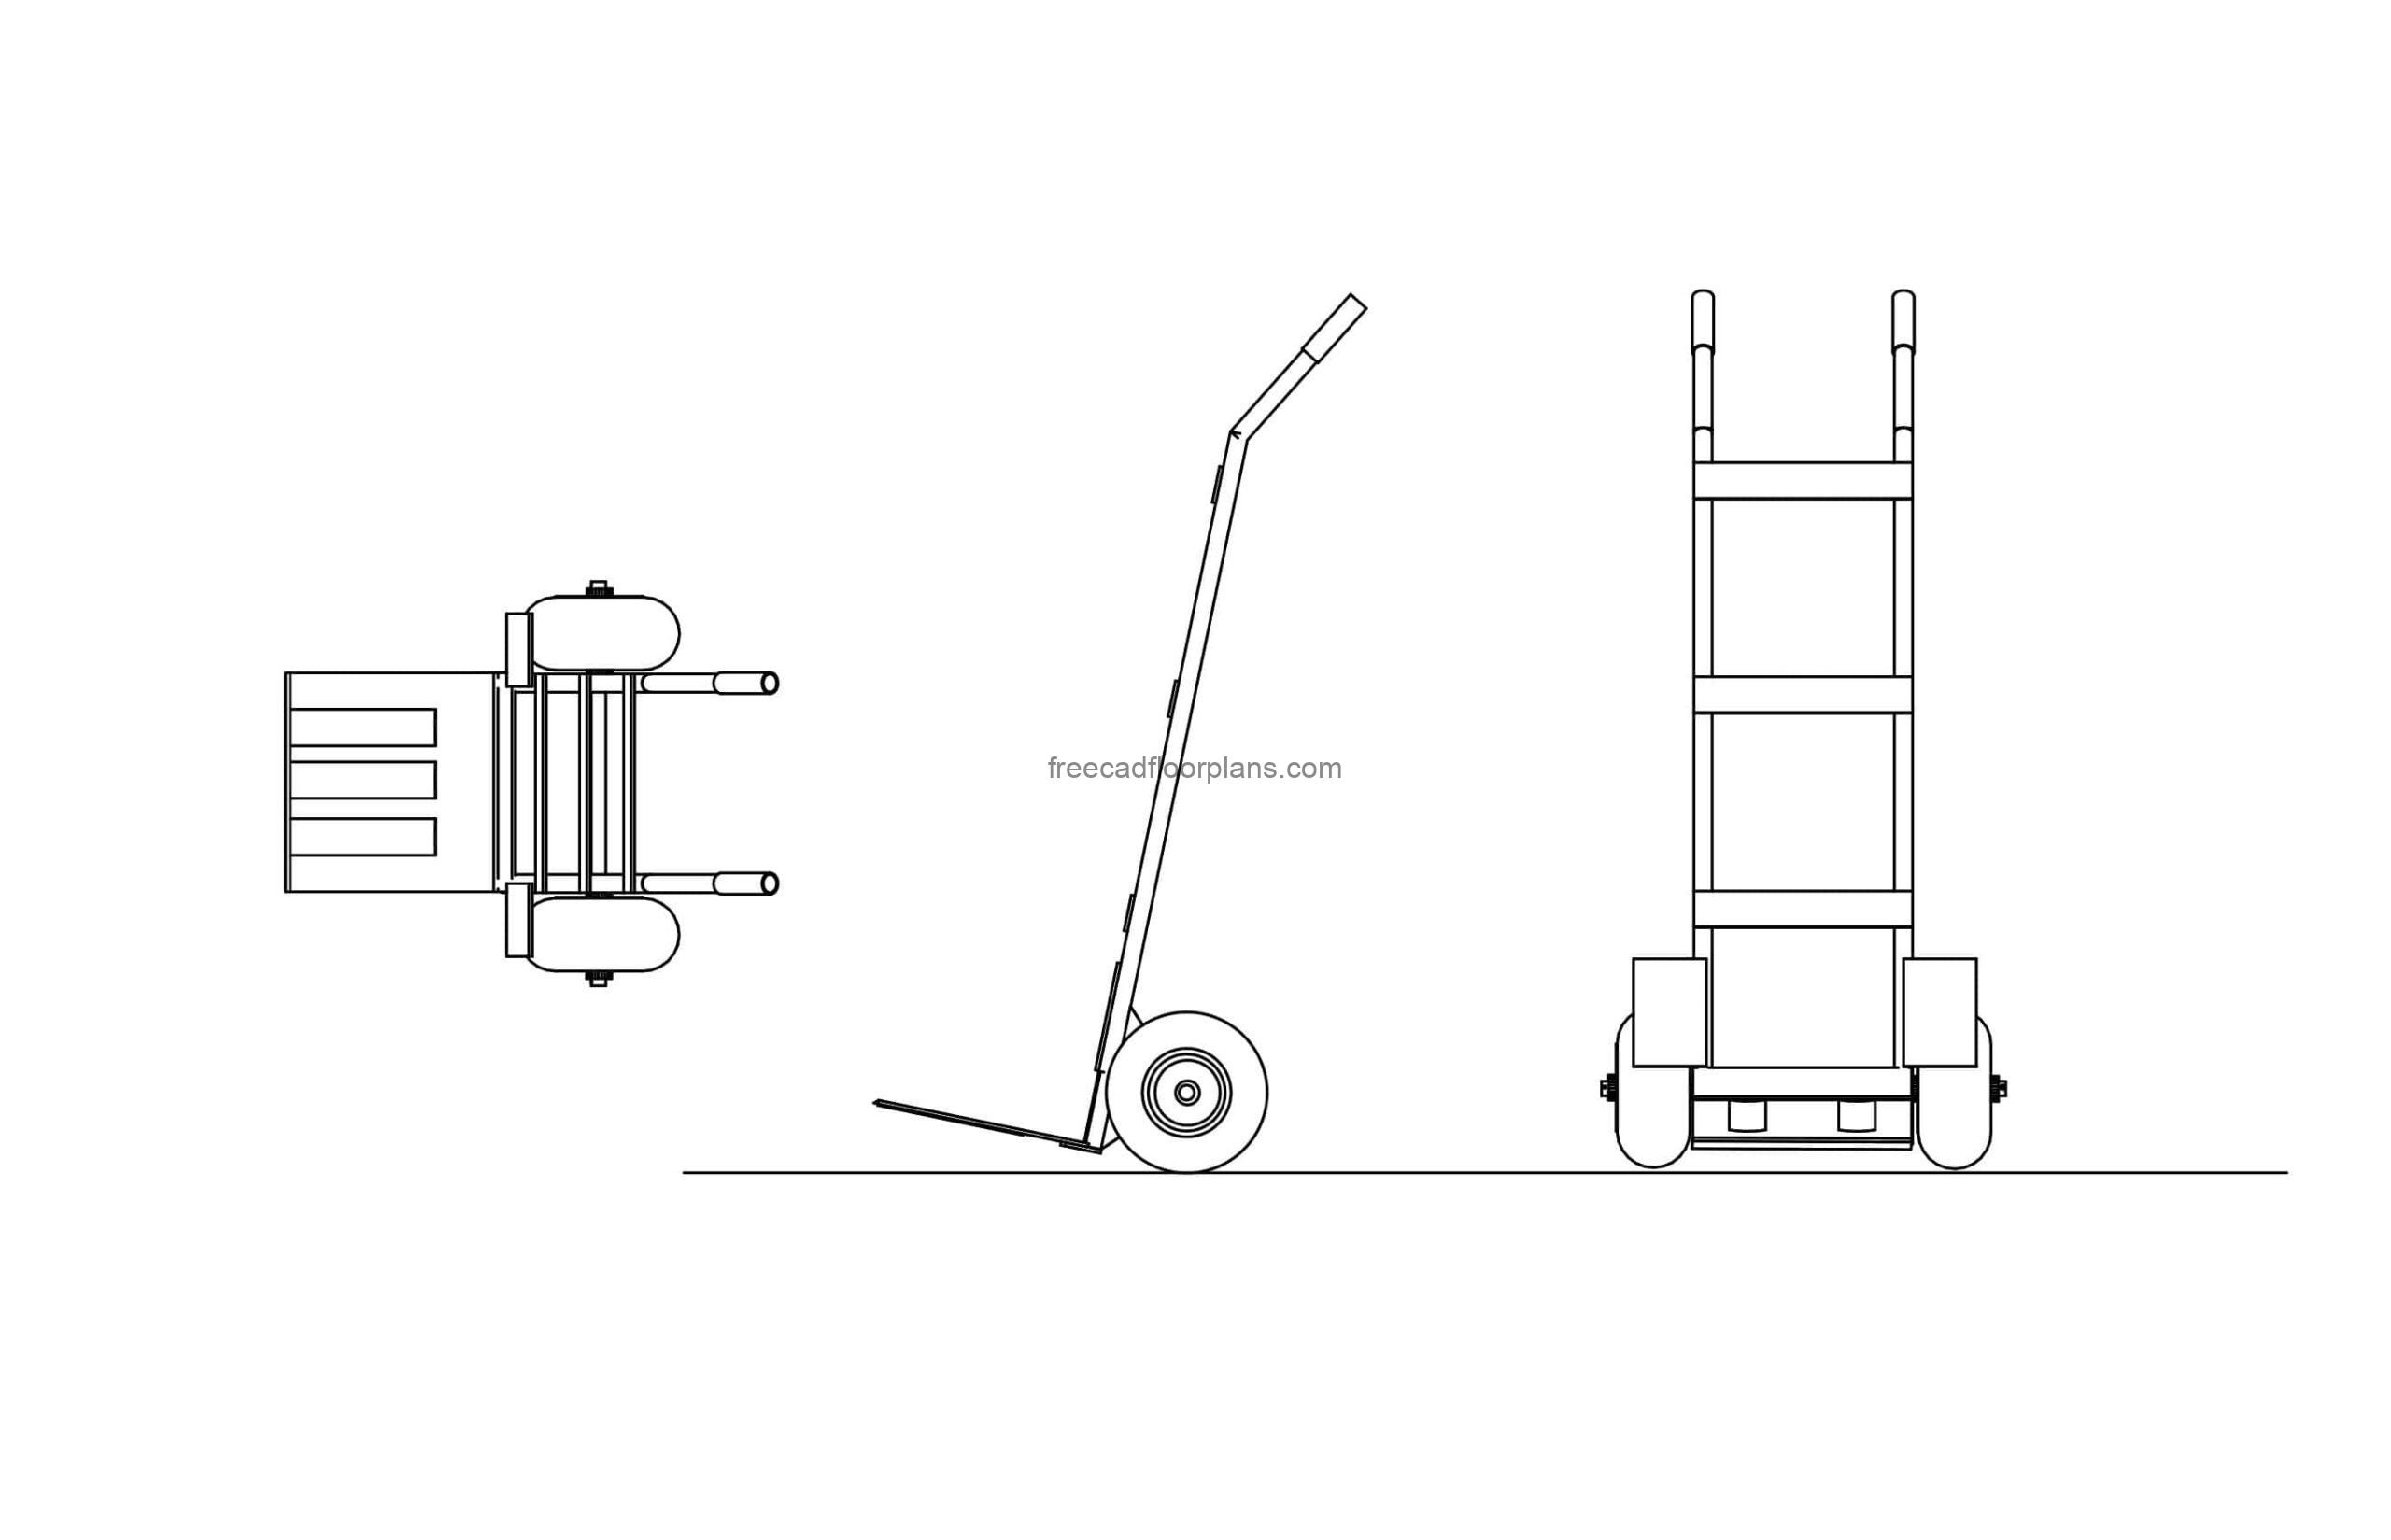 luggage trolley cart drawing front and lateral views in dwg CAD format for free download